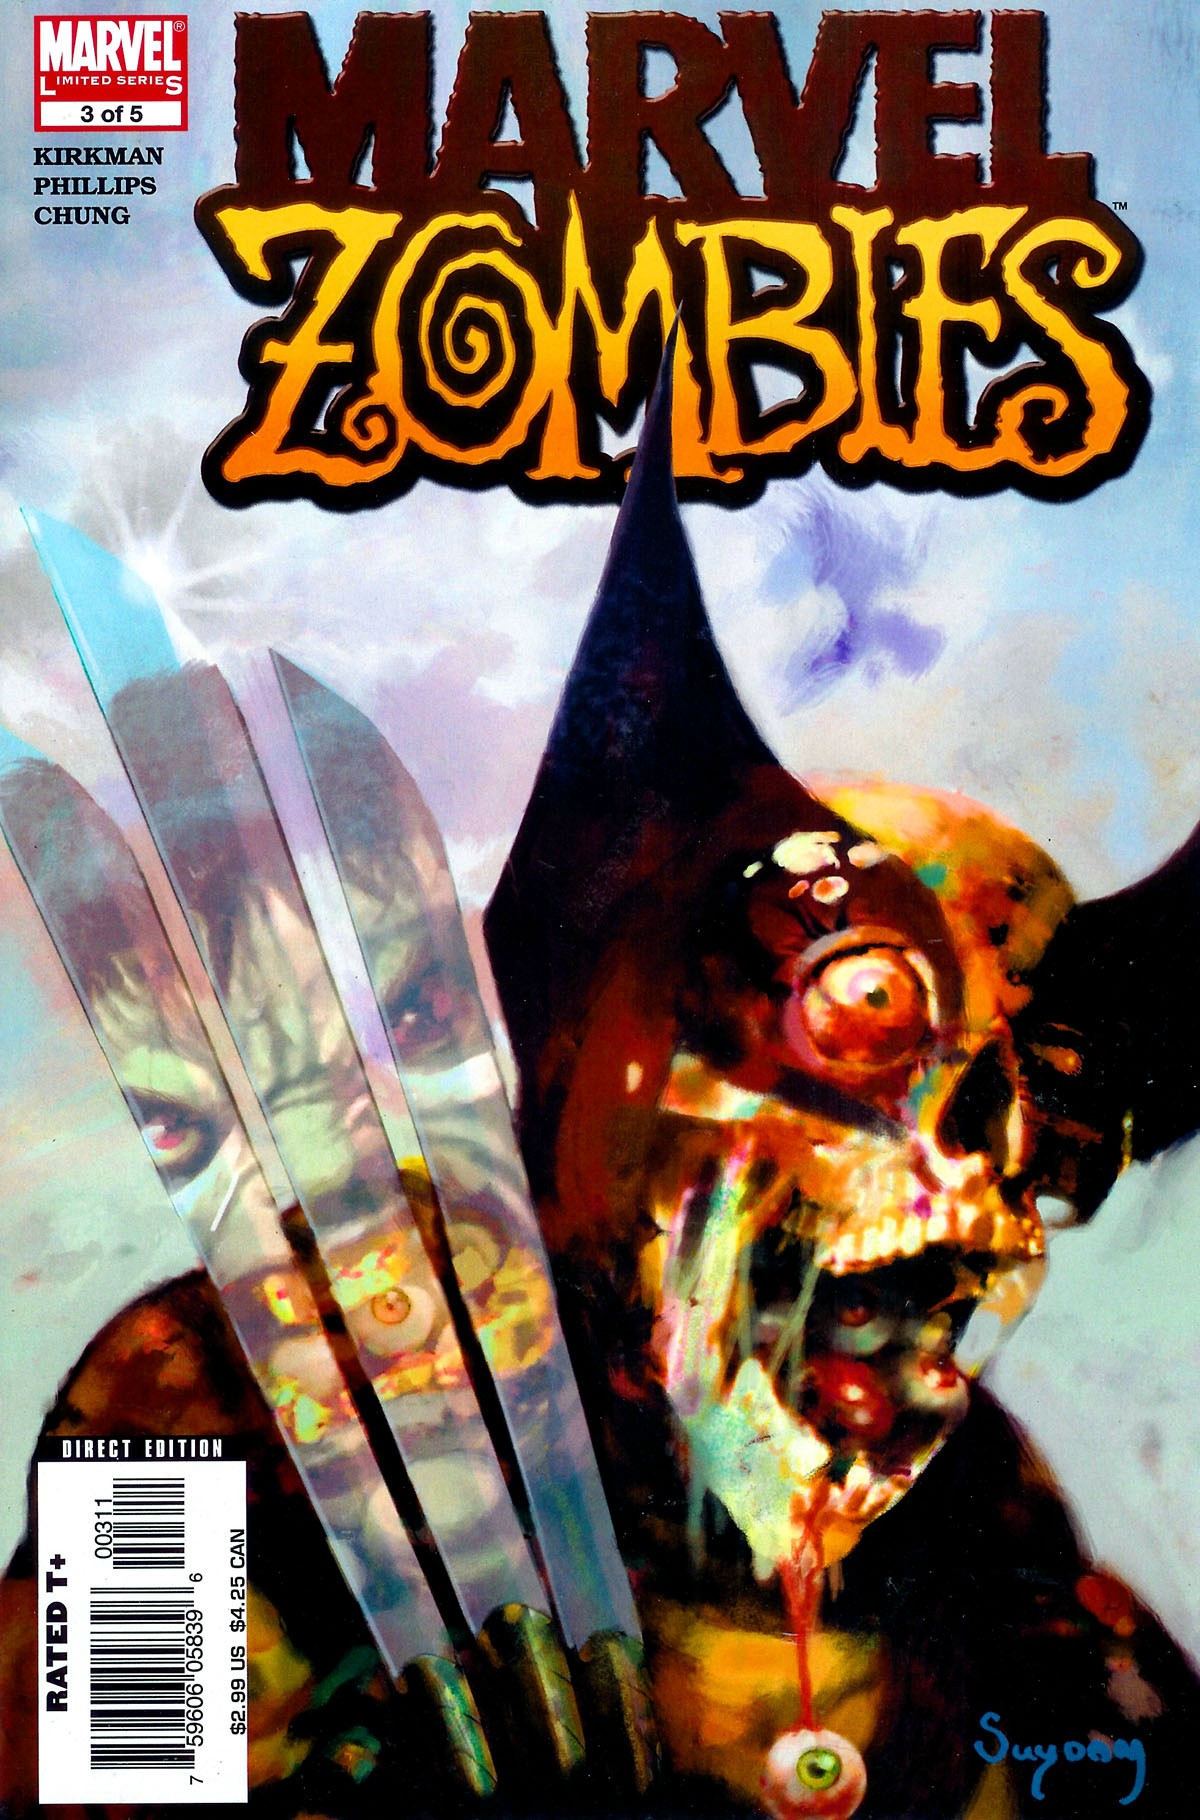 From 1975 to 1996, Marvel had trademarked the word, zombies. Perhaps understanding that this trademark wasnt enforceable, in 1996 they registered Marvel Zombies